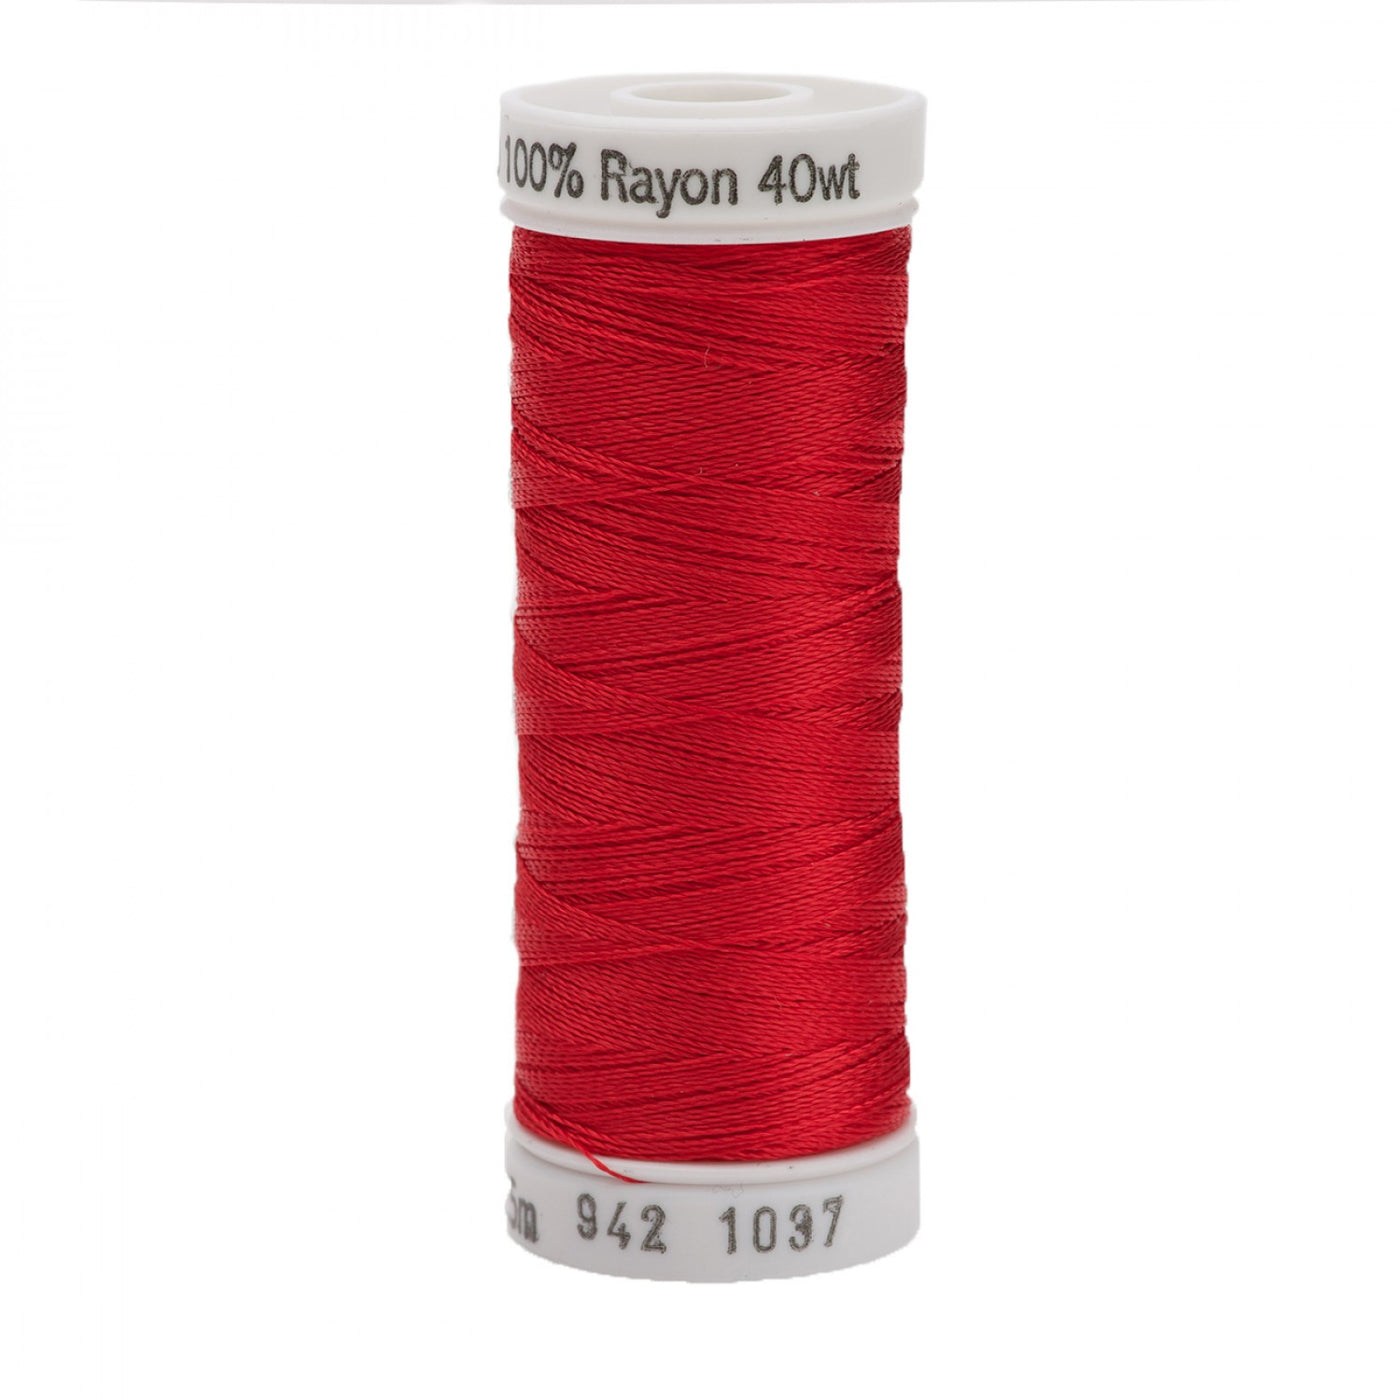 225m 40wt Rayon Embroidery Thread 1037 Lt Red (4202142466093)